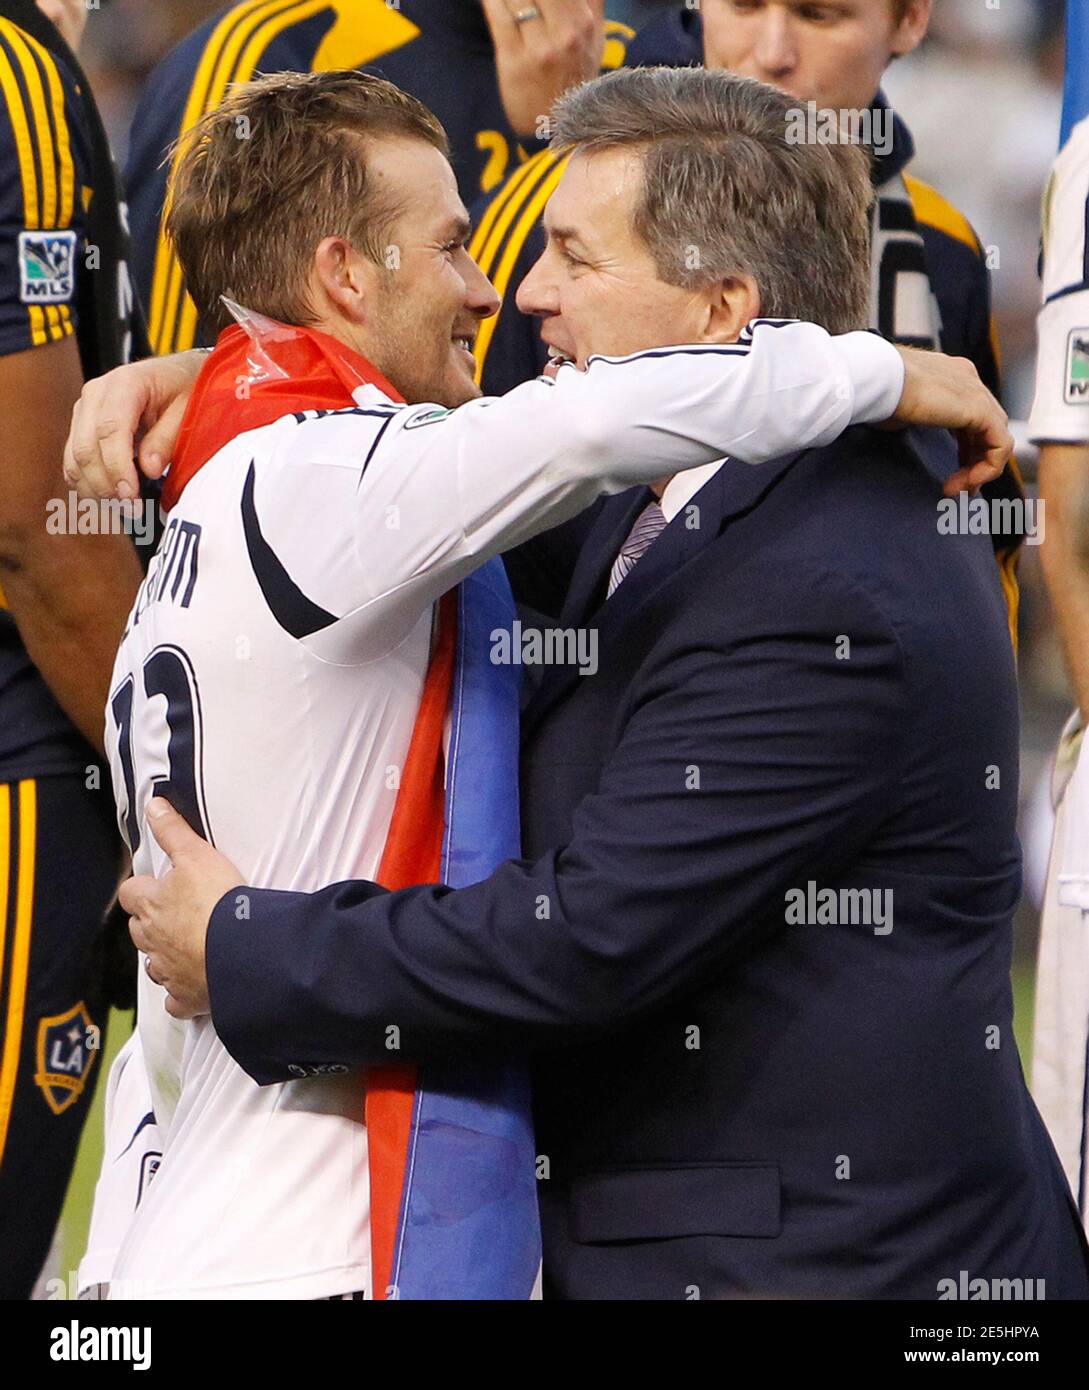 Los Angeles Galaxy's David Beckham (L) and Tim Leiweke, President and CEO of Anschutz Entertainment Group (AEG), embrace after the Galaxy defeated the Houston Dynamo to win the MLS Cup championship soccer game in Carson, California, December 1, 2012. REUTERS/Danny Moloshok (UNITED STATES - Tags: SPORT SOCCER MEDIA) Stock Photo